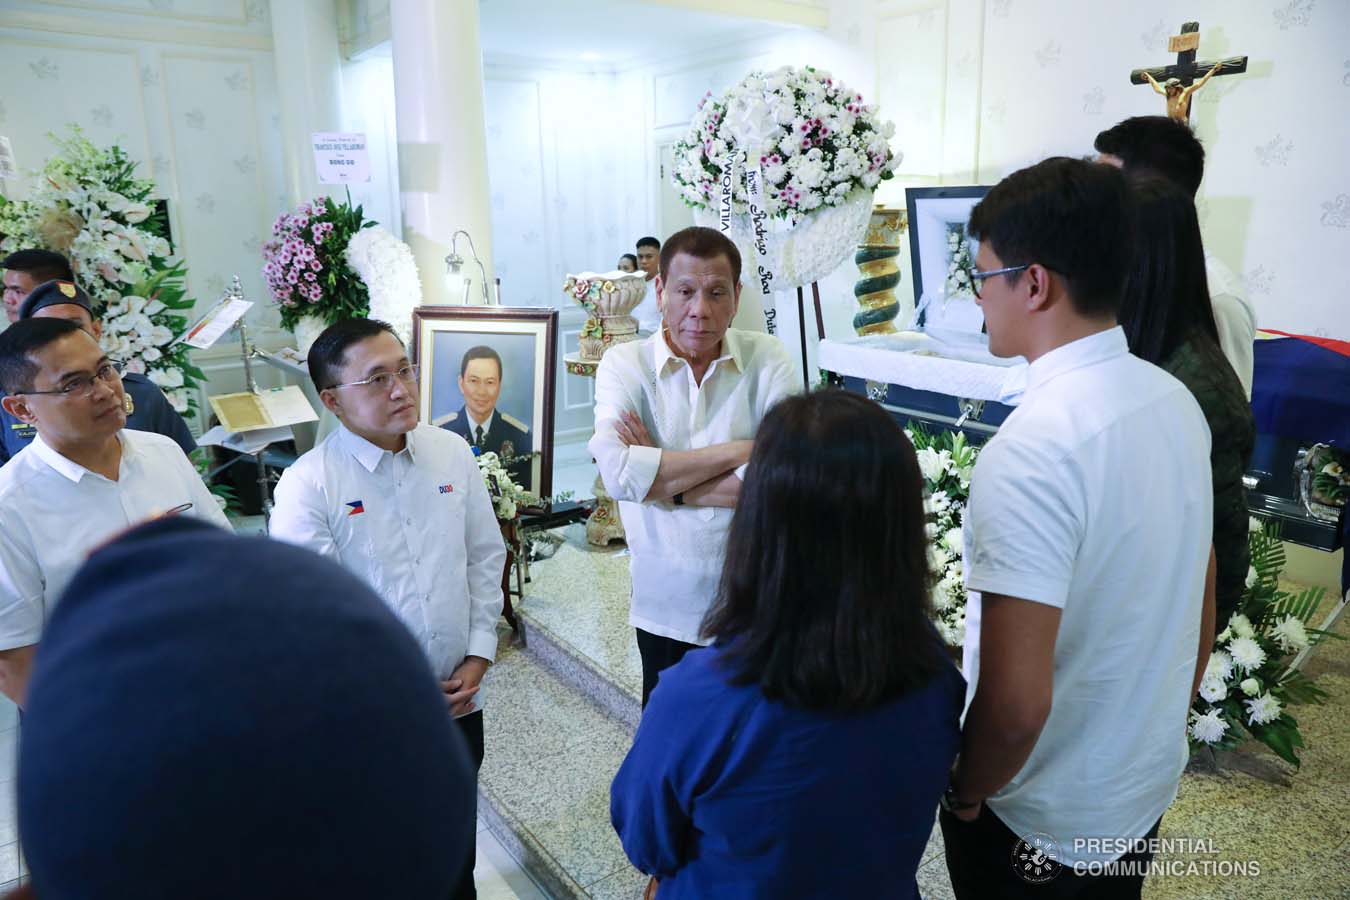 President Rodrigo Roa Duterte condoles with the family of the late Retired Police General Francisco Villaroman as he visited the wake at the Cosmopolitan Funeral Homes in Davao City on January 17, 2020. ROBINSON NIÑAL JR./PRESIDENTIAL PHOTO